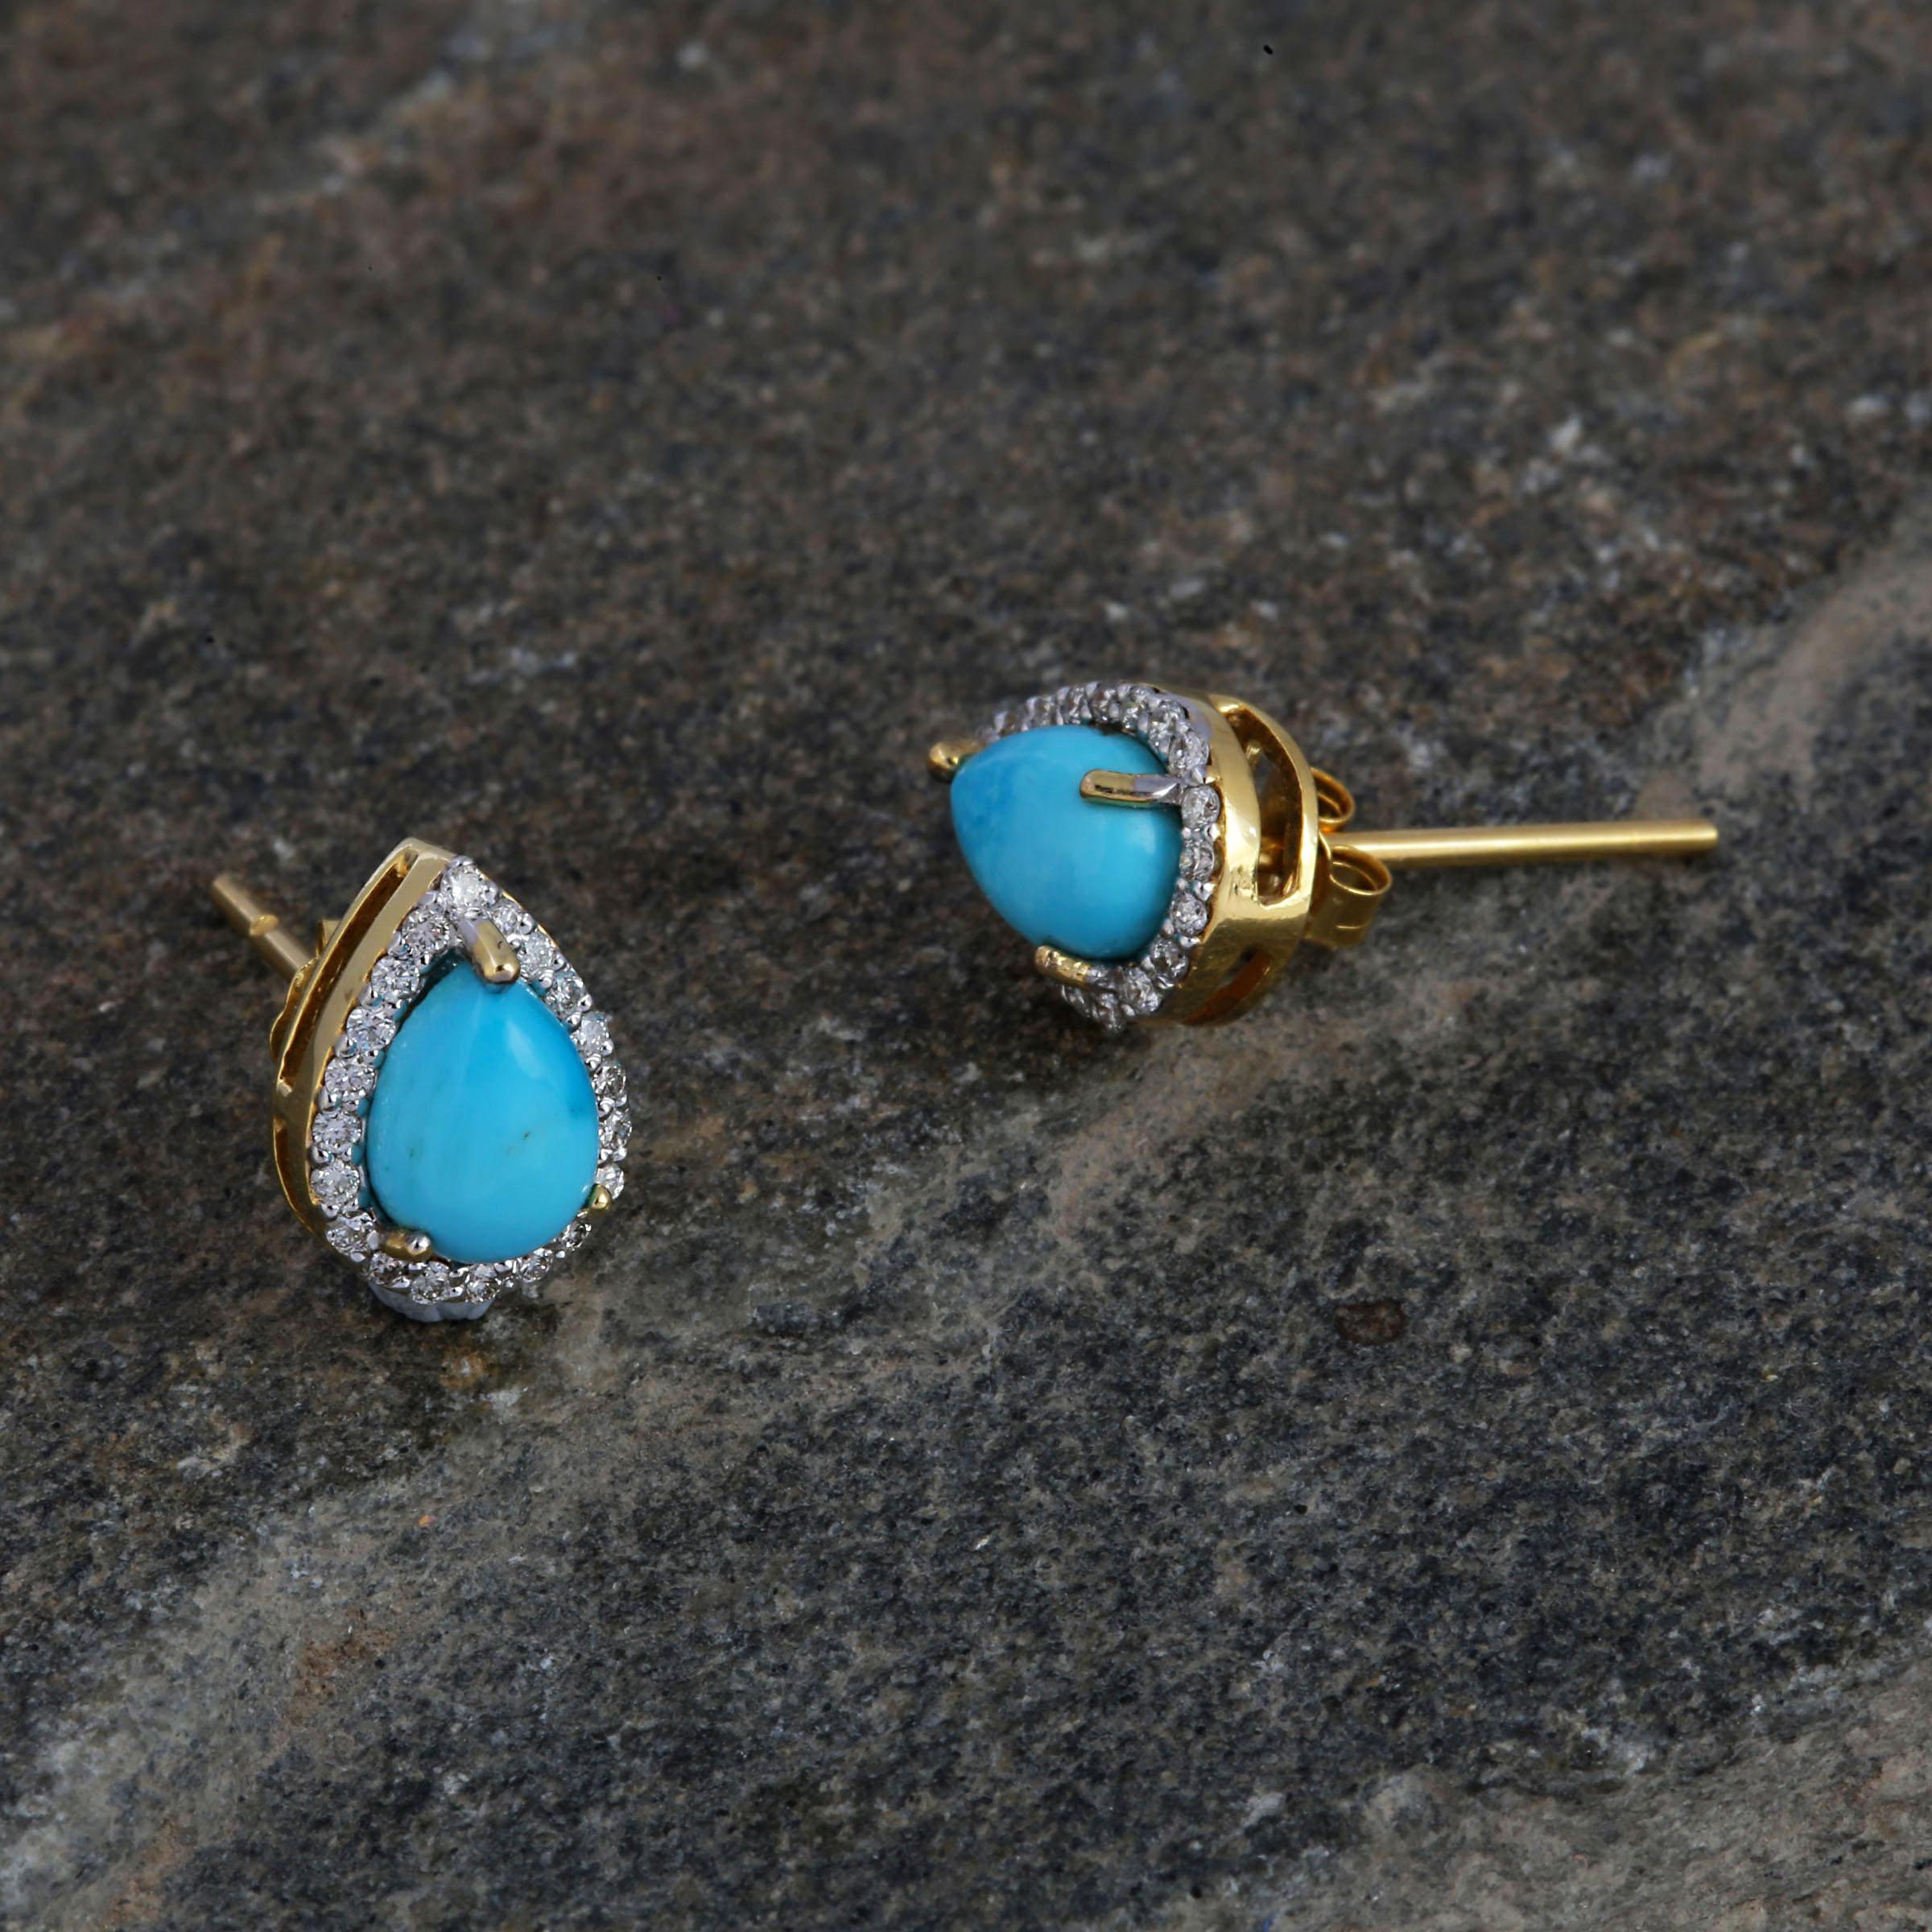 Brilliant Cut Turquoise Stud Earrings With Diamond in 14Karat Gold For Sale